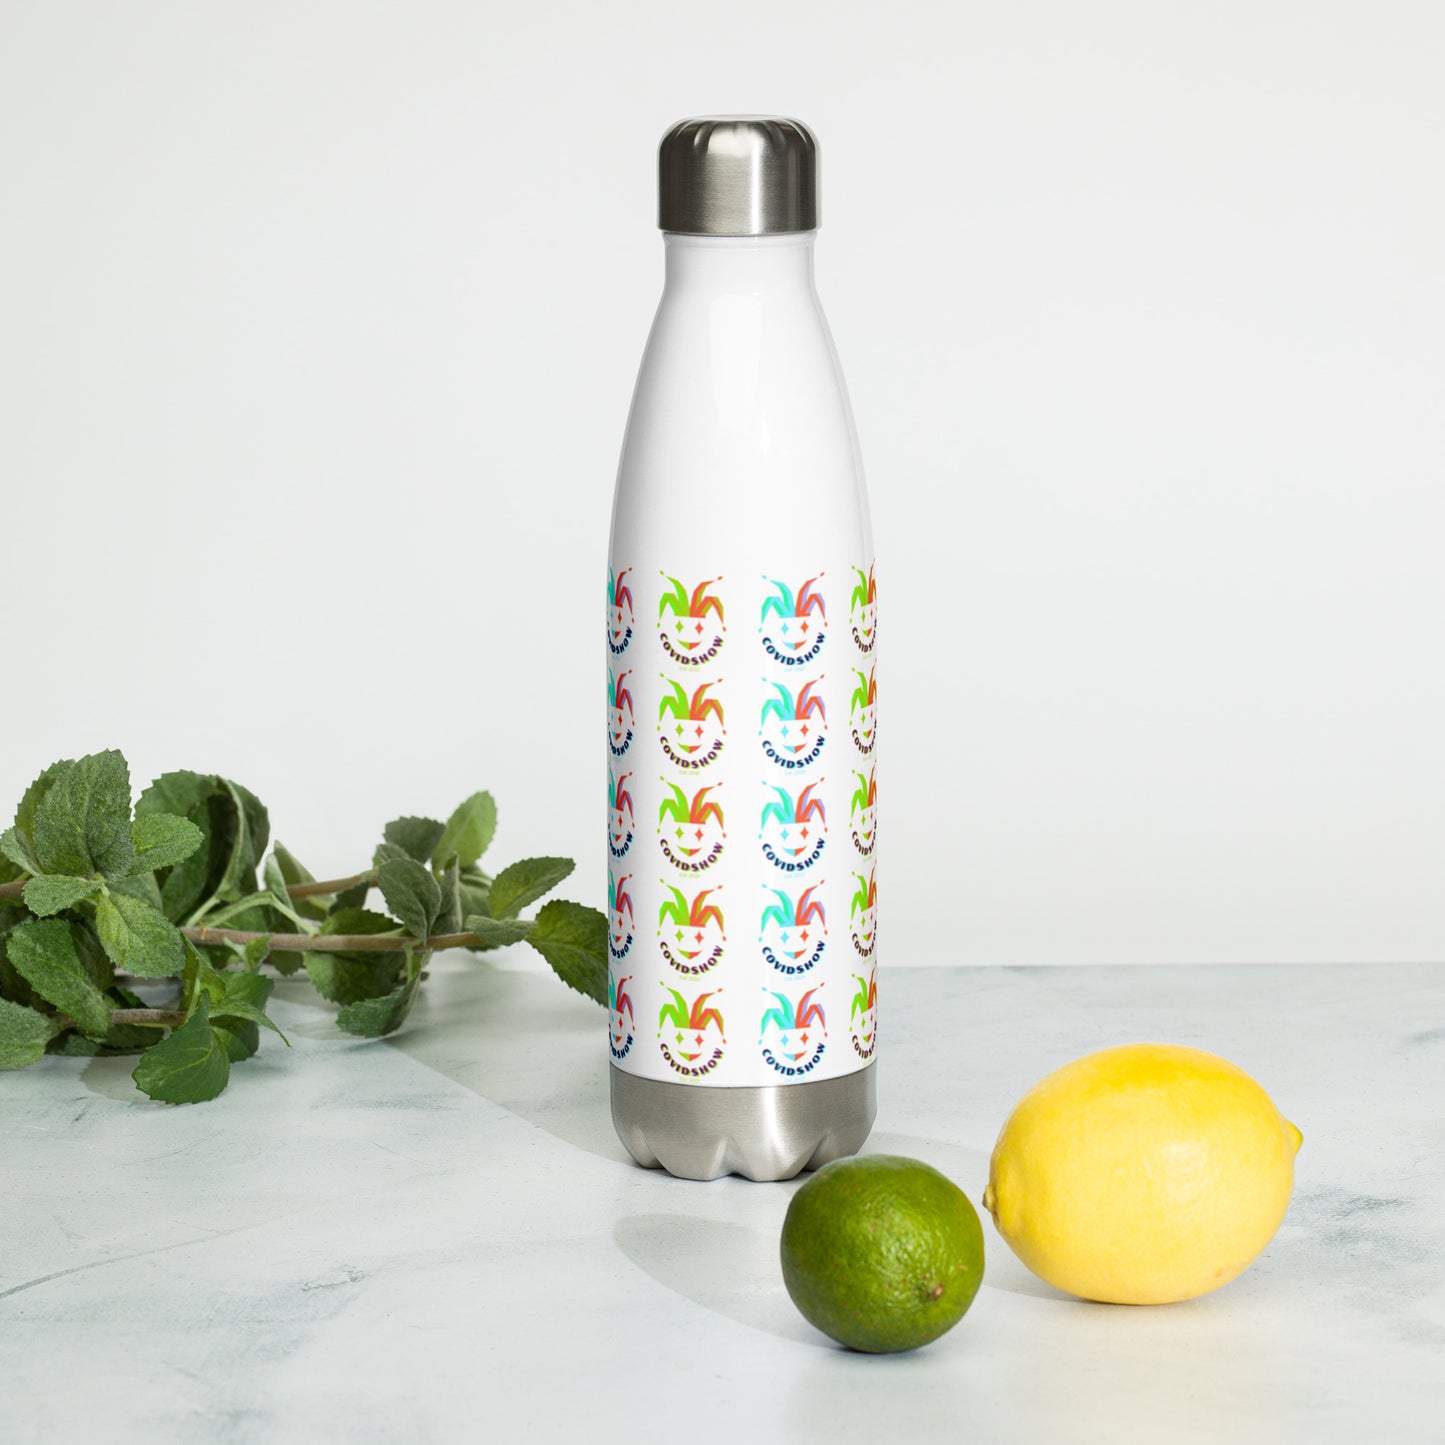 Covidshow patterned Stainless Steel Water Bottle